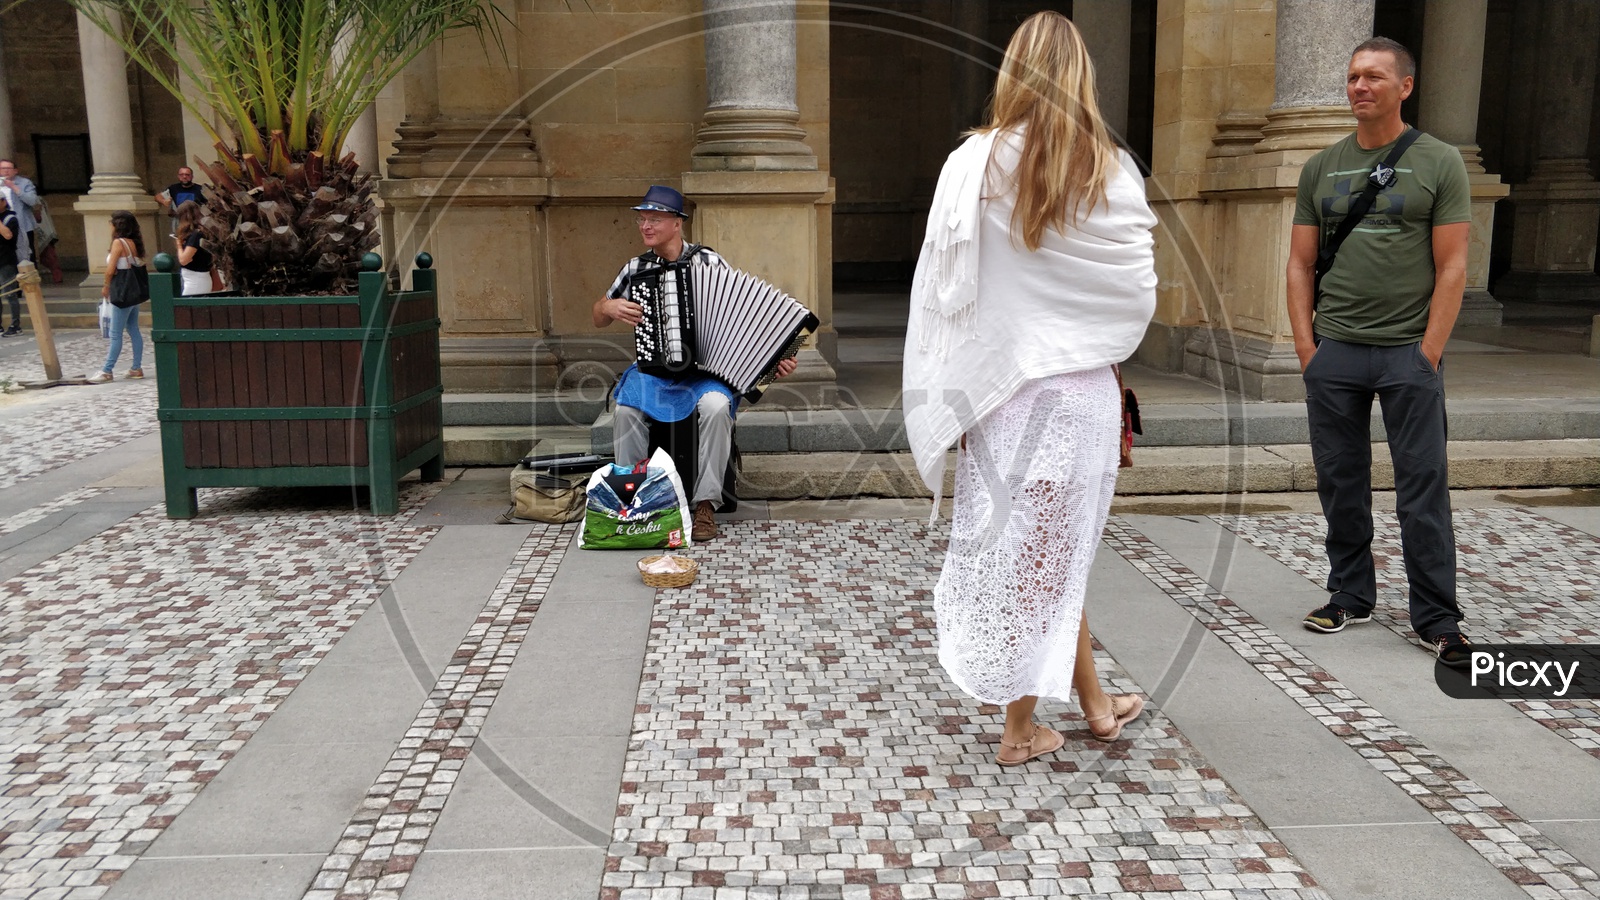 Prague City With Street Artists and tourists on Streets